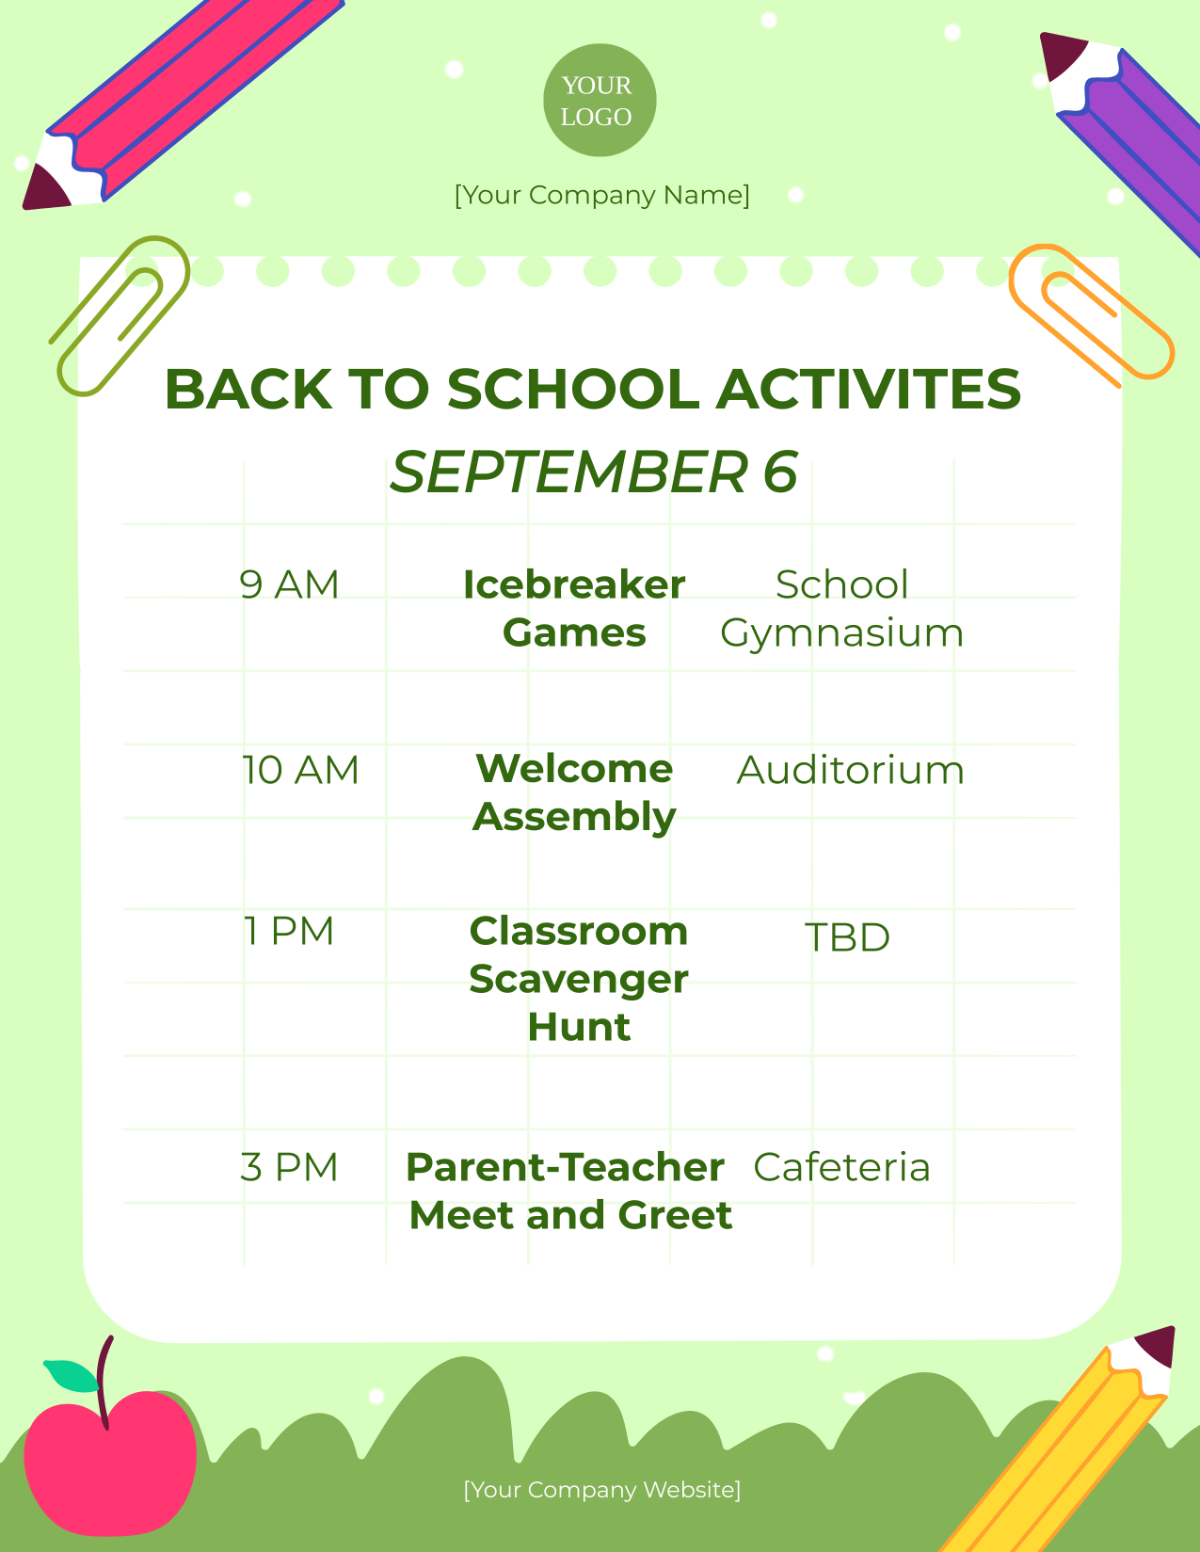 Back to School Activities for Middle School